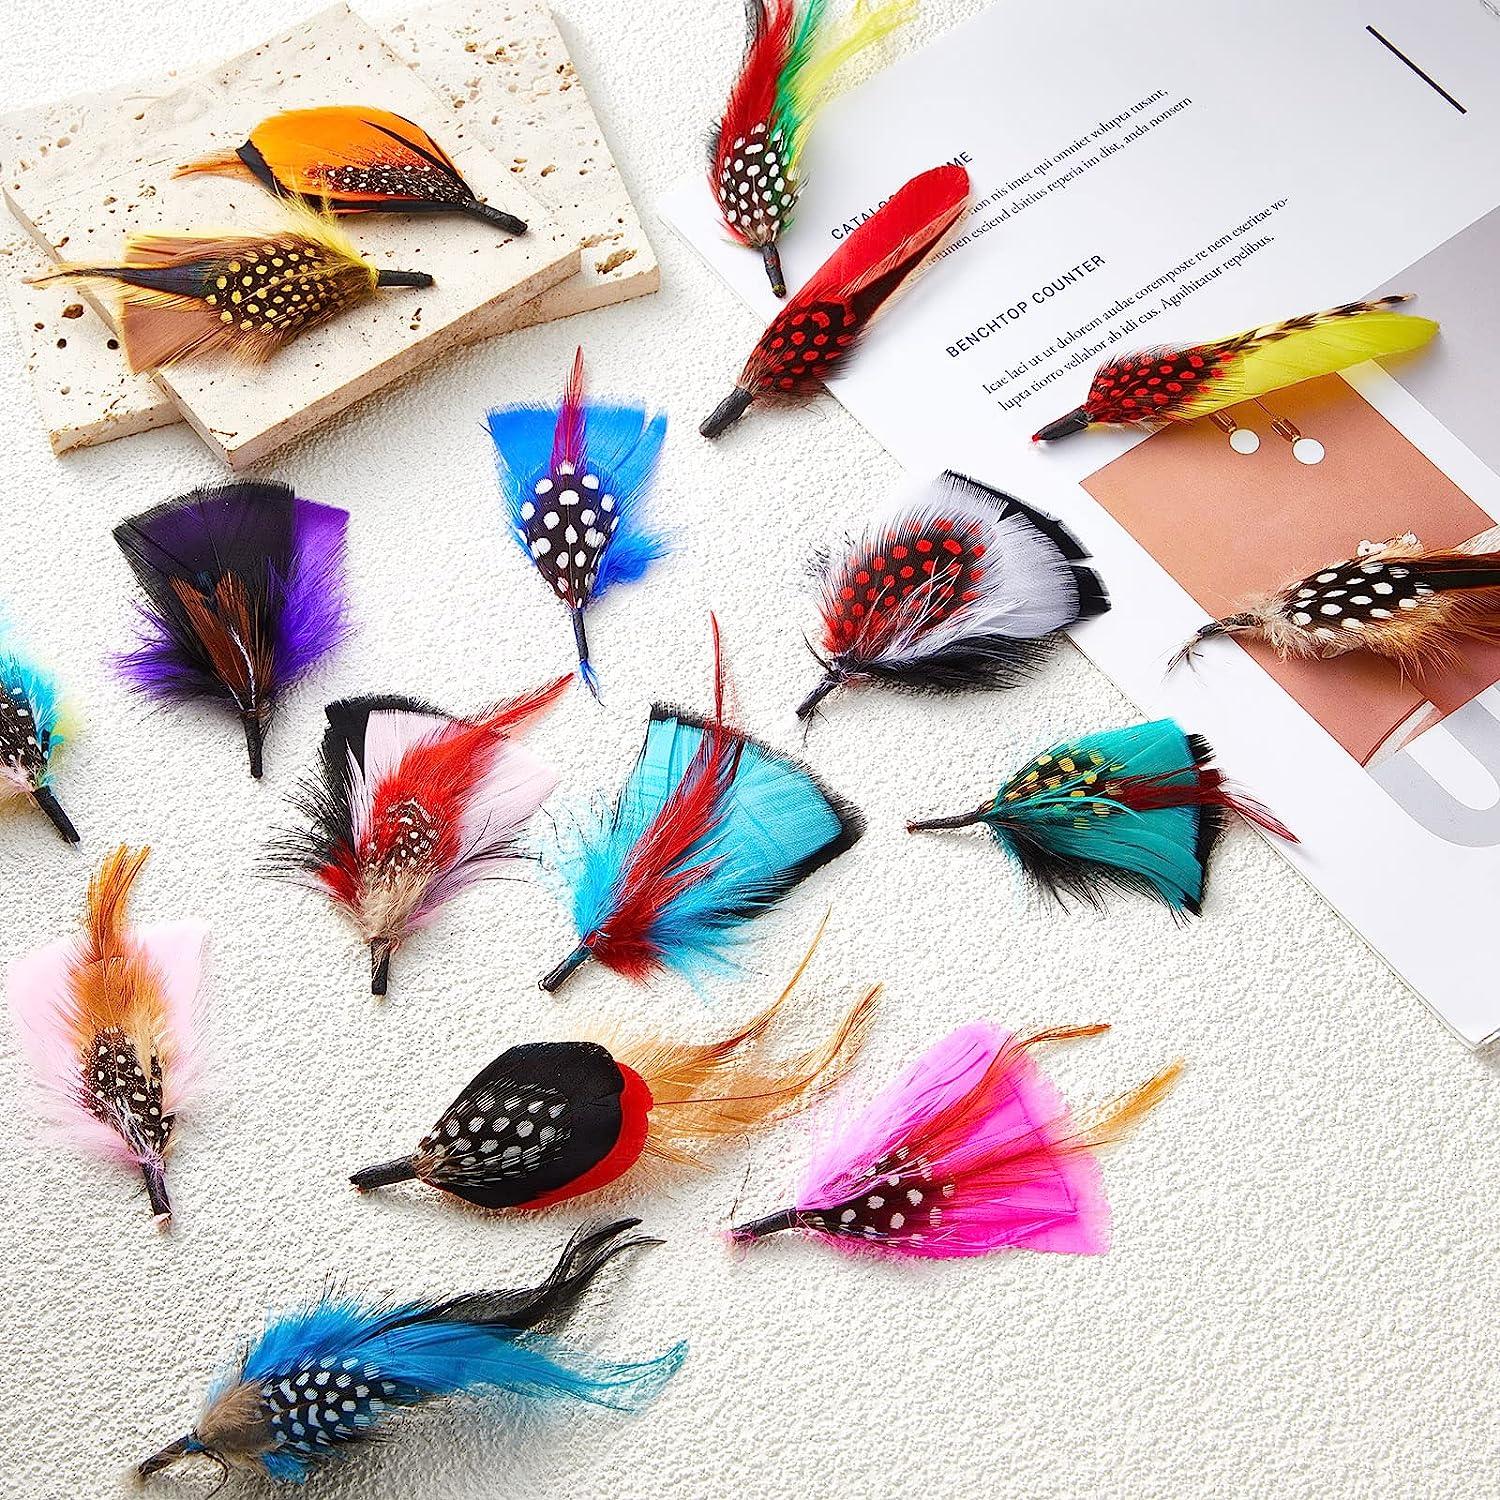 Kenning 39 Pcs Hat Feathers Assorted Feathers for Fedora Hats Colorful Real  Feathers for DIY Craft Christmas Decorations Men Women approx. 8-10 cm